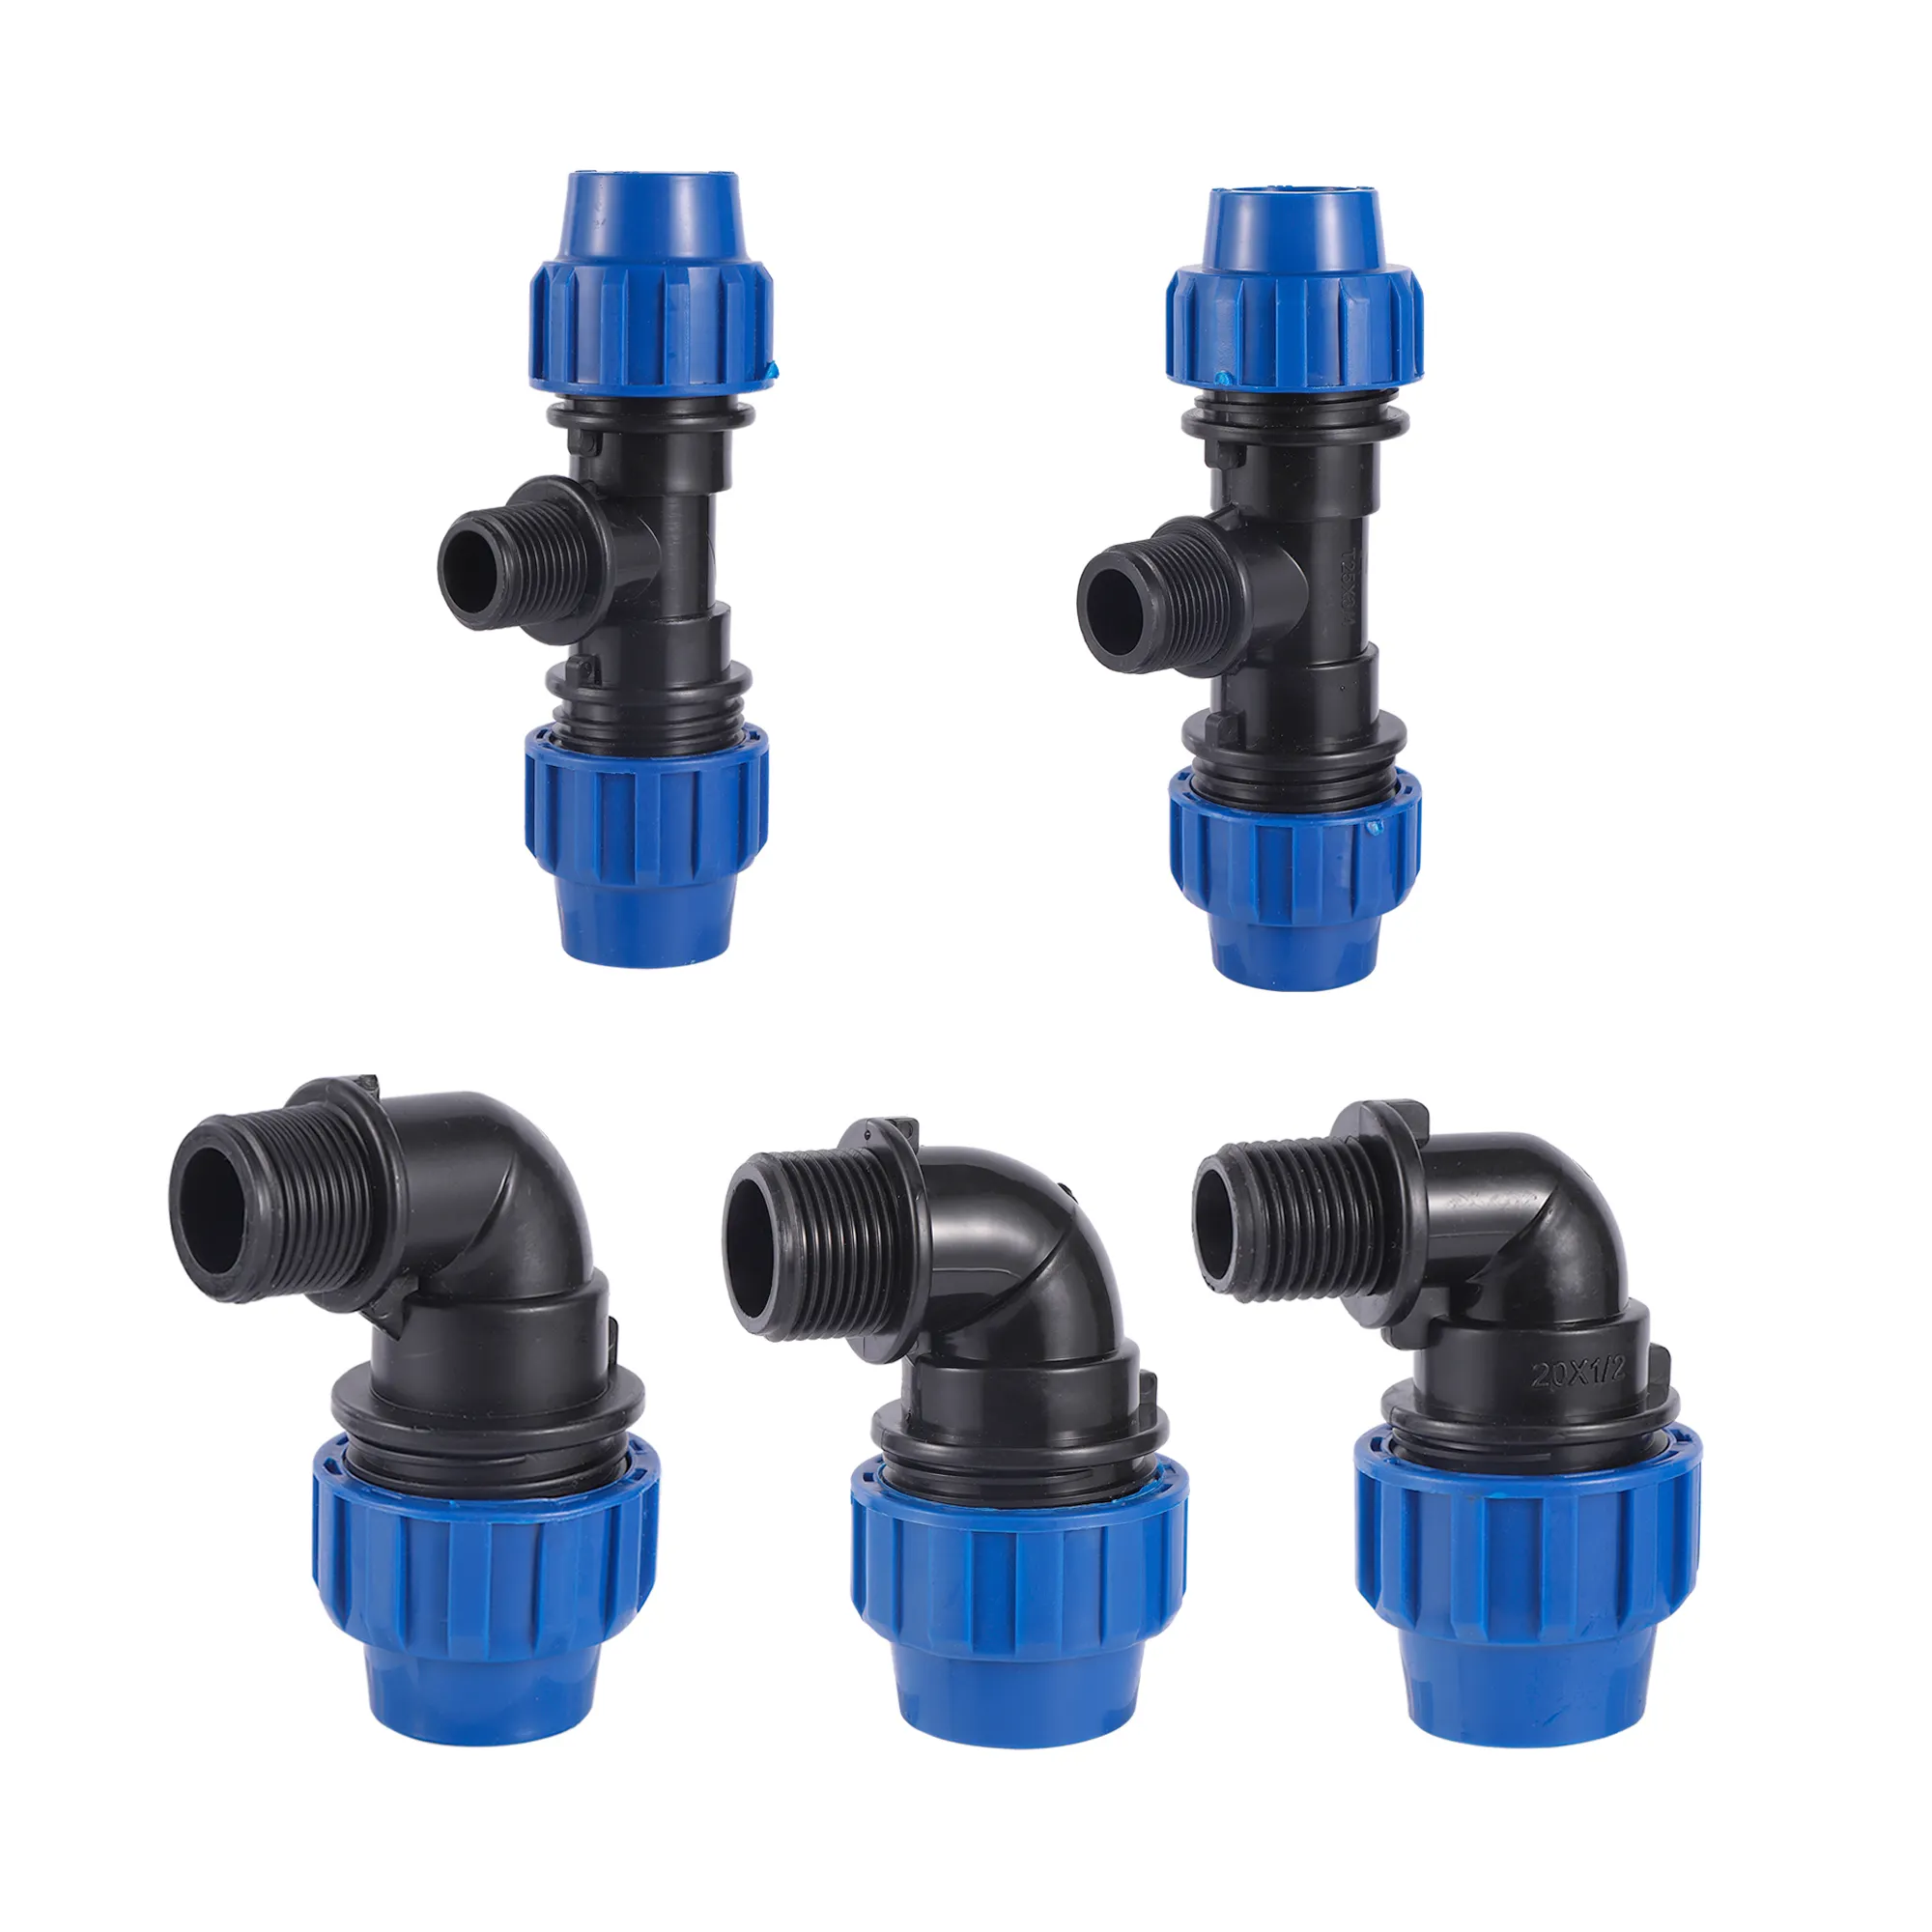 PE Connector Pipe Coupling 20MM 25MM 32MM to 1/2" 3/4" 1" Male Thread HDPE Pipe Fittings